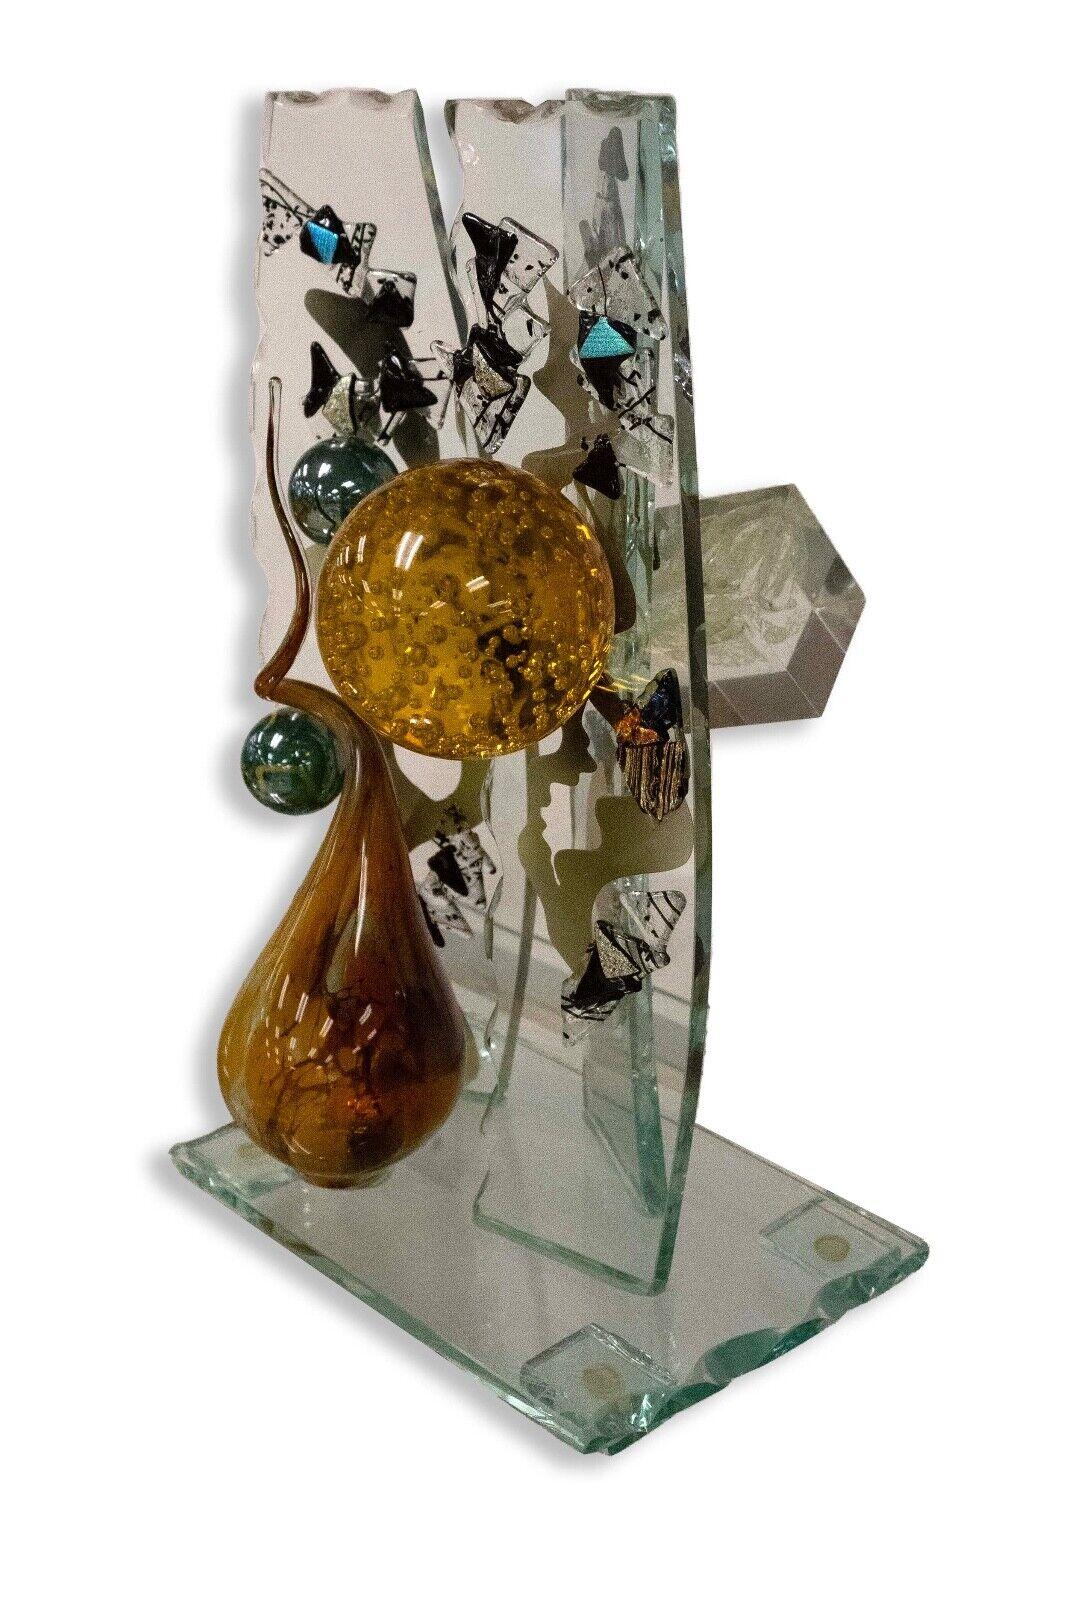 A whimsical and intriguing abstract fused and blown glass assemblage sculpture depicting unique modern forms by glass artist Steve Brewster. Dimensions: 11